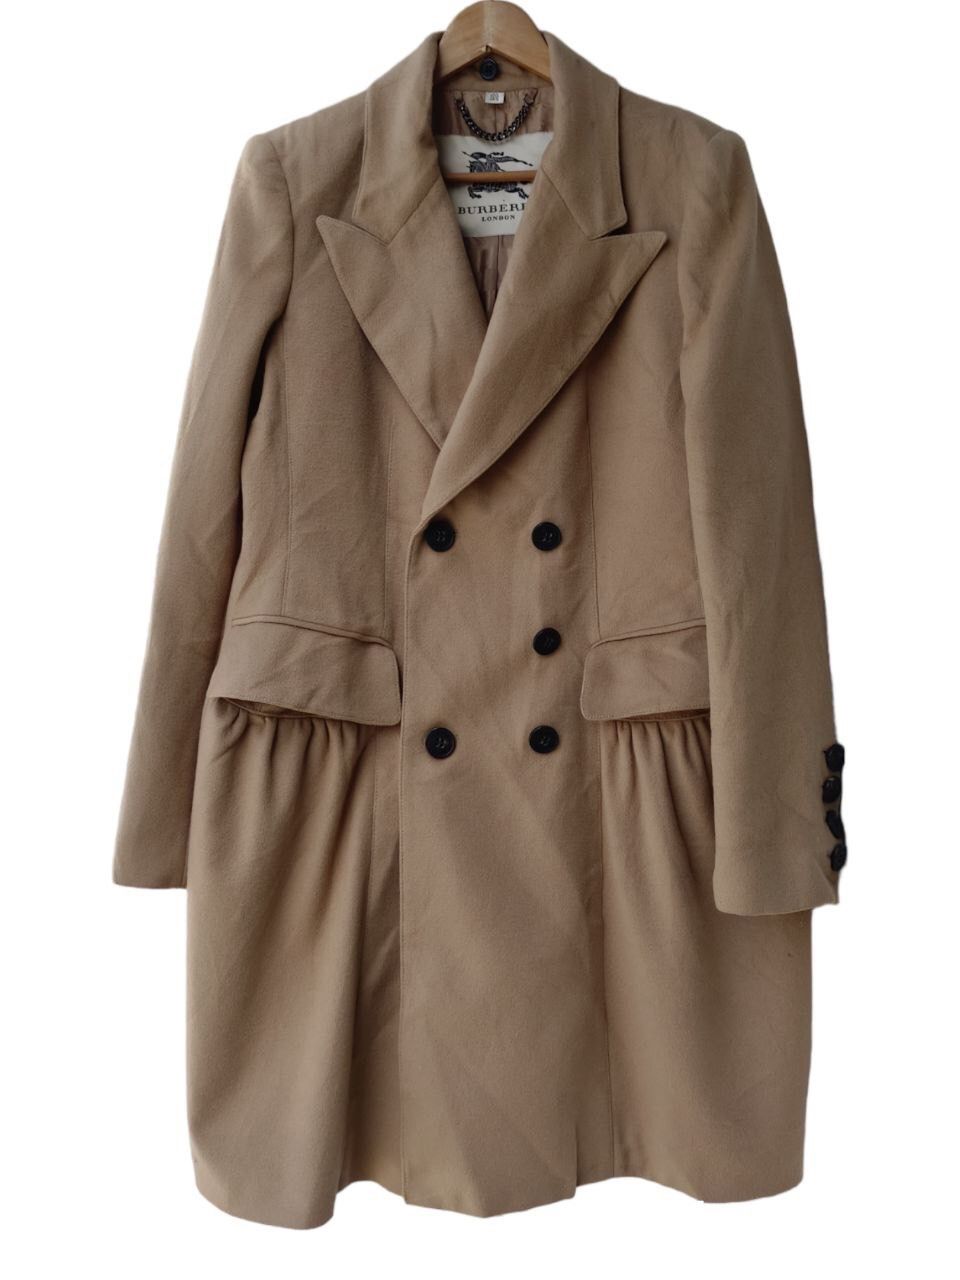 Burberry Burberry London Double Breasted Virgin Wool Coat Size XL / US 12-14 / IT 48-50 - 1 Preview